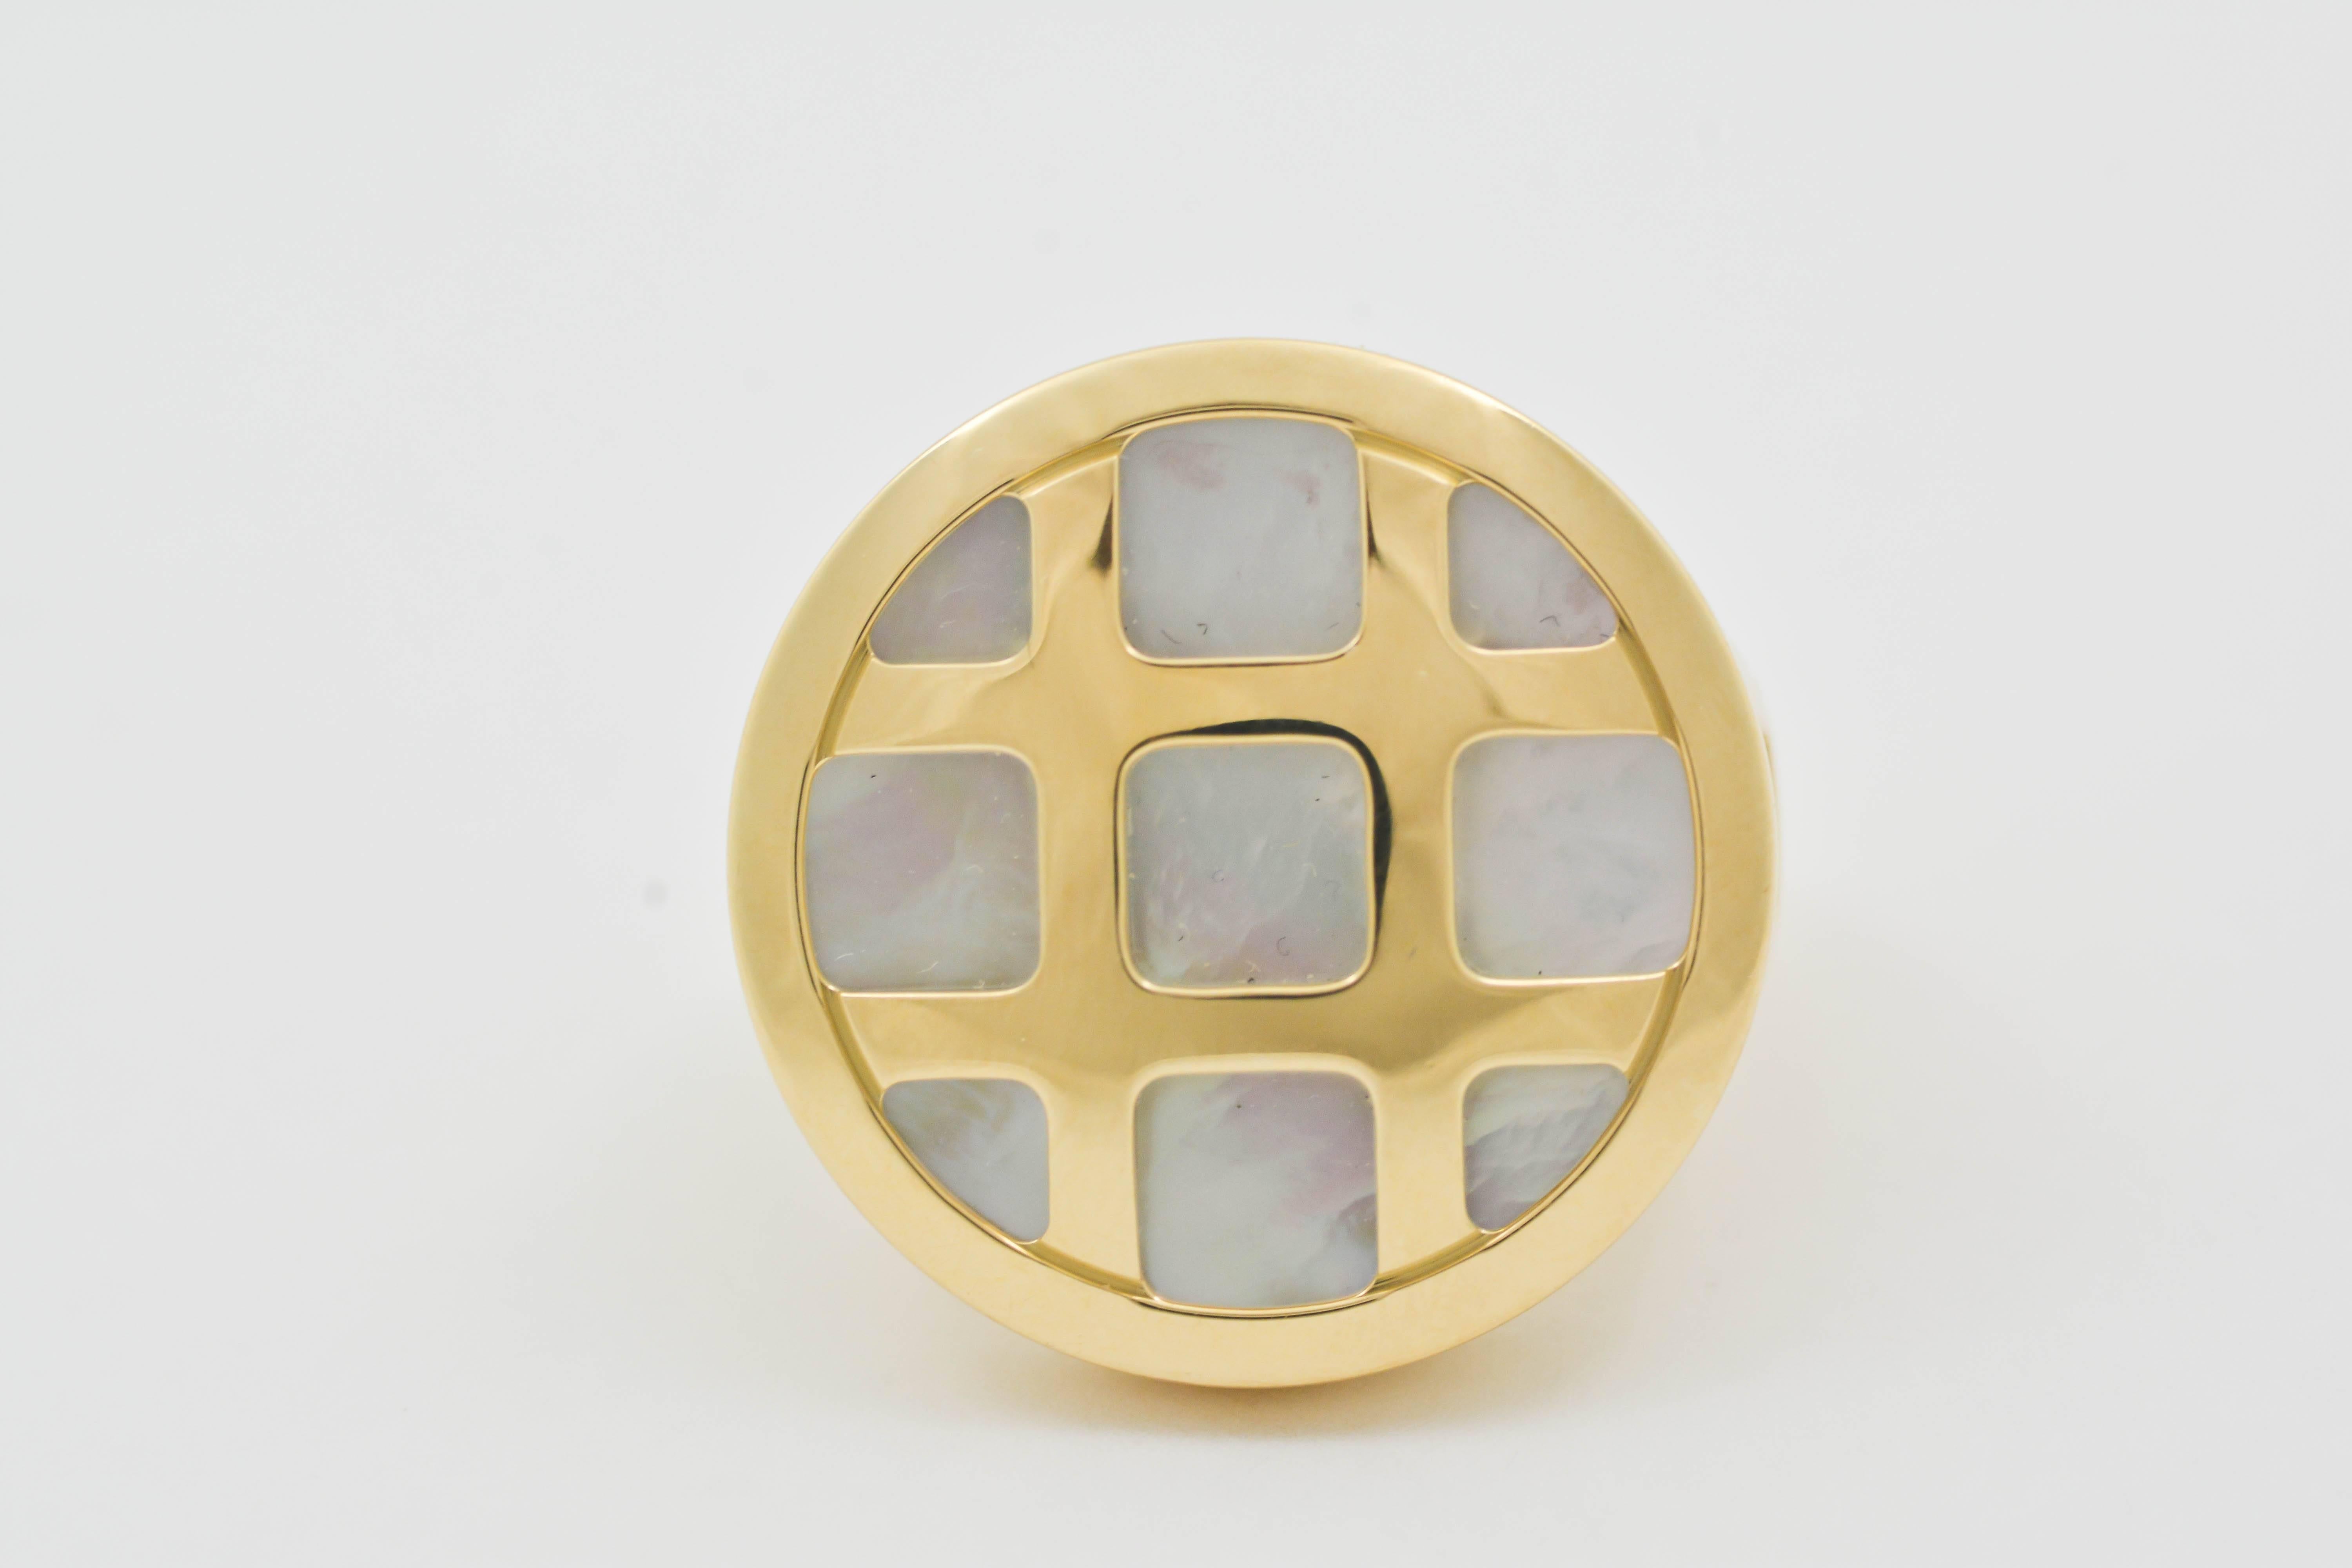 Classic 18kt yellow gold is expertly crafted in this Cartier design. The “Pasha” ring is set with a beautiful, white, mother-of-pearl background, and the yellow gold forms a tic-tac-toe pattern at the top. Measuring 24.27mm in diameter, this ring’s